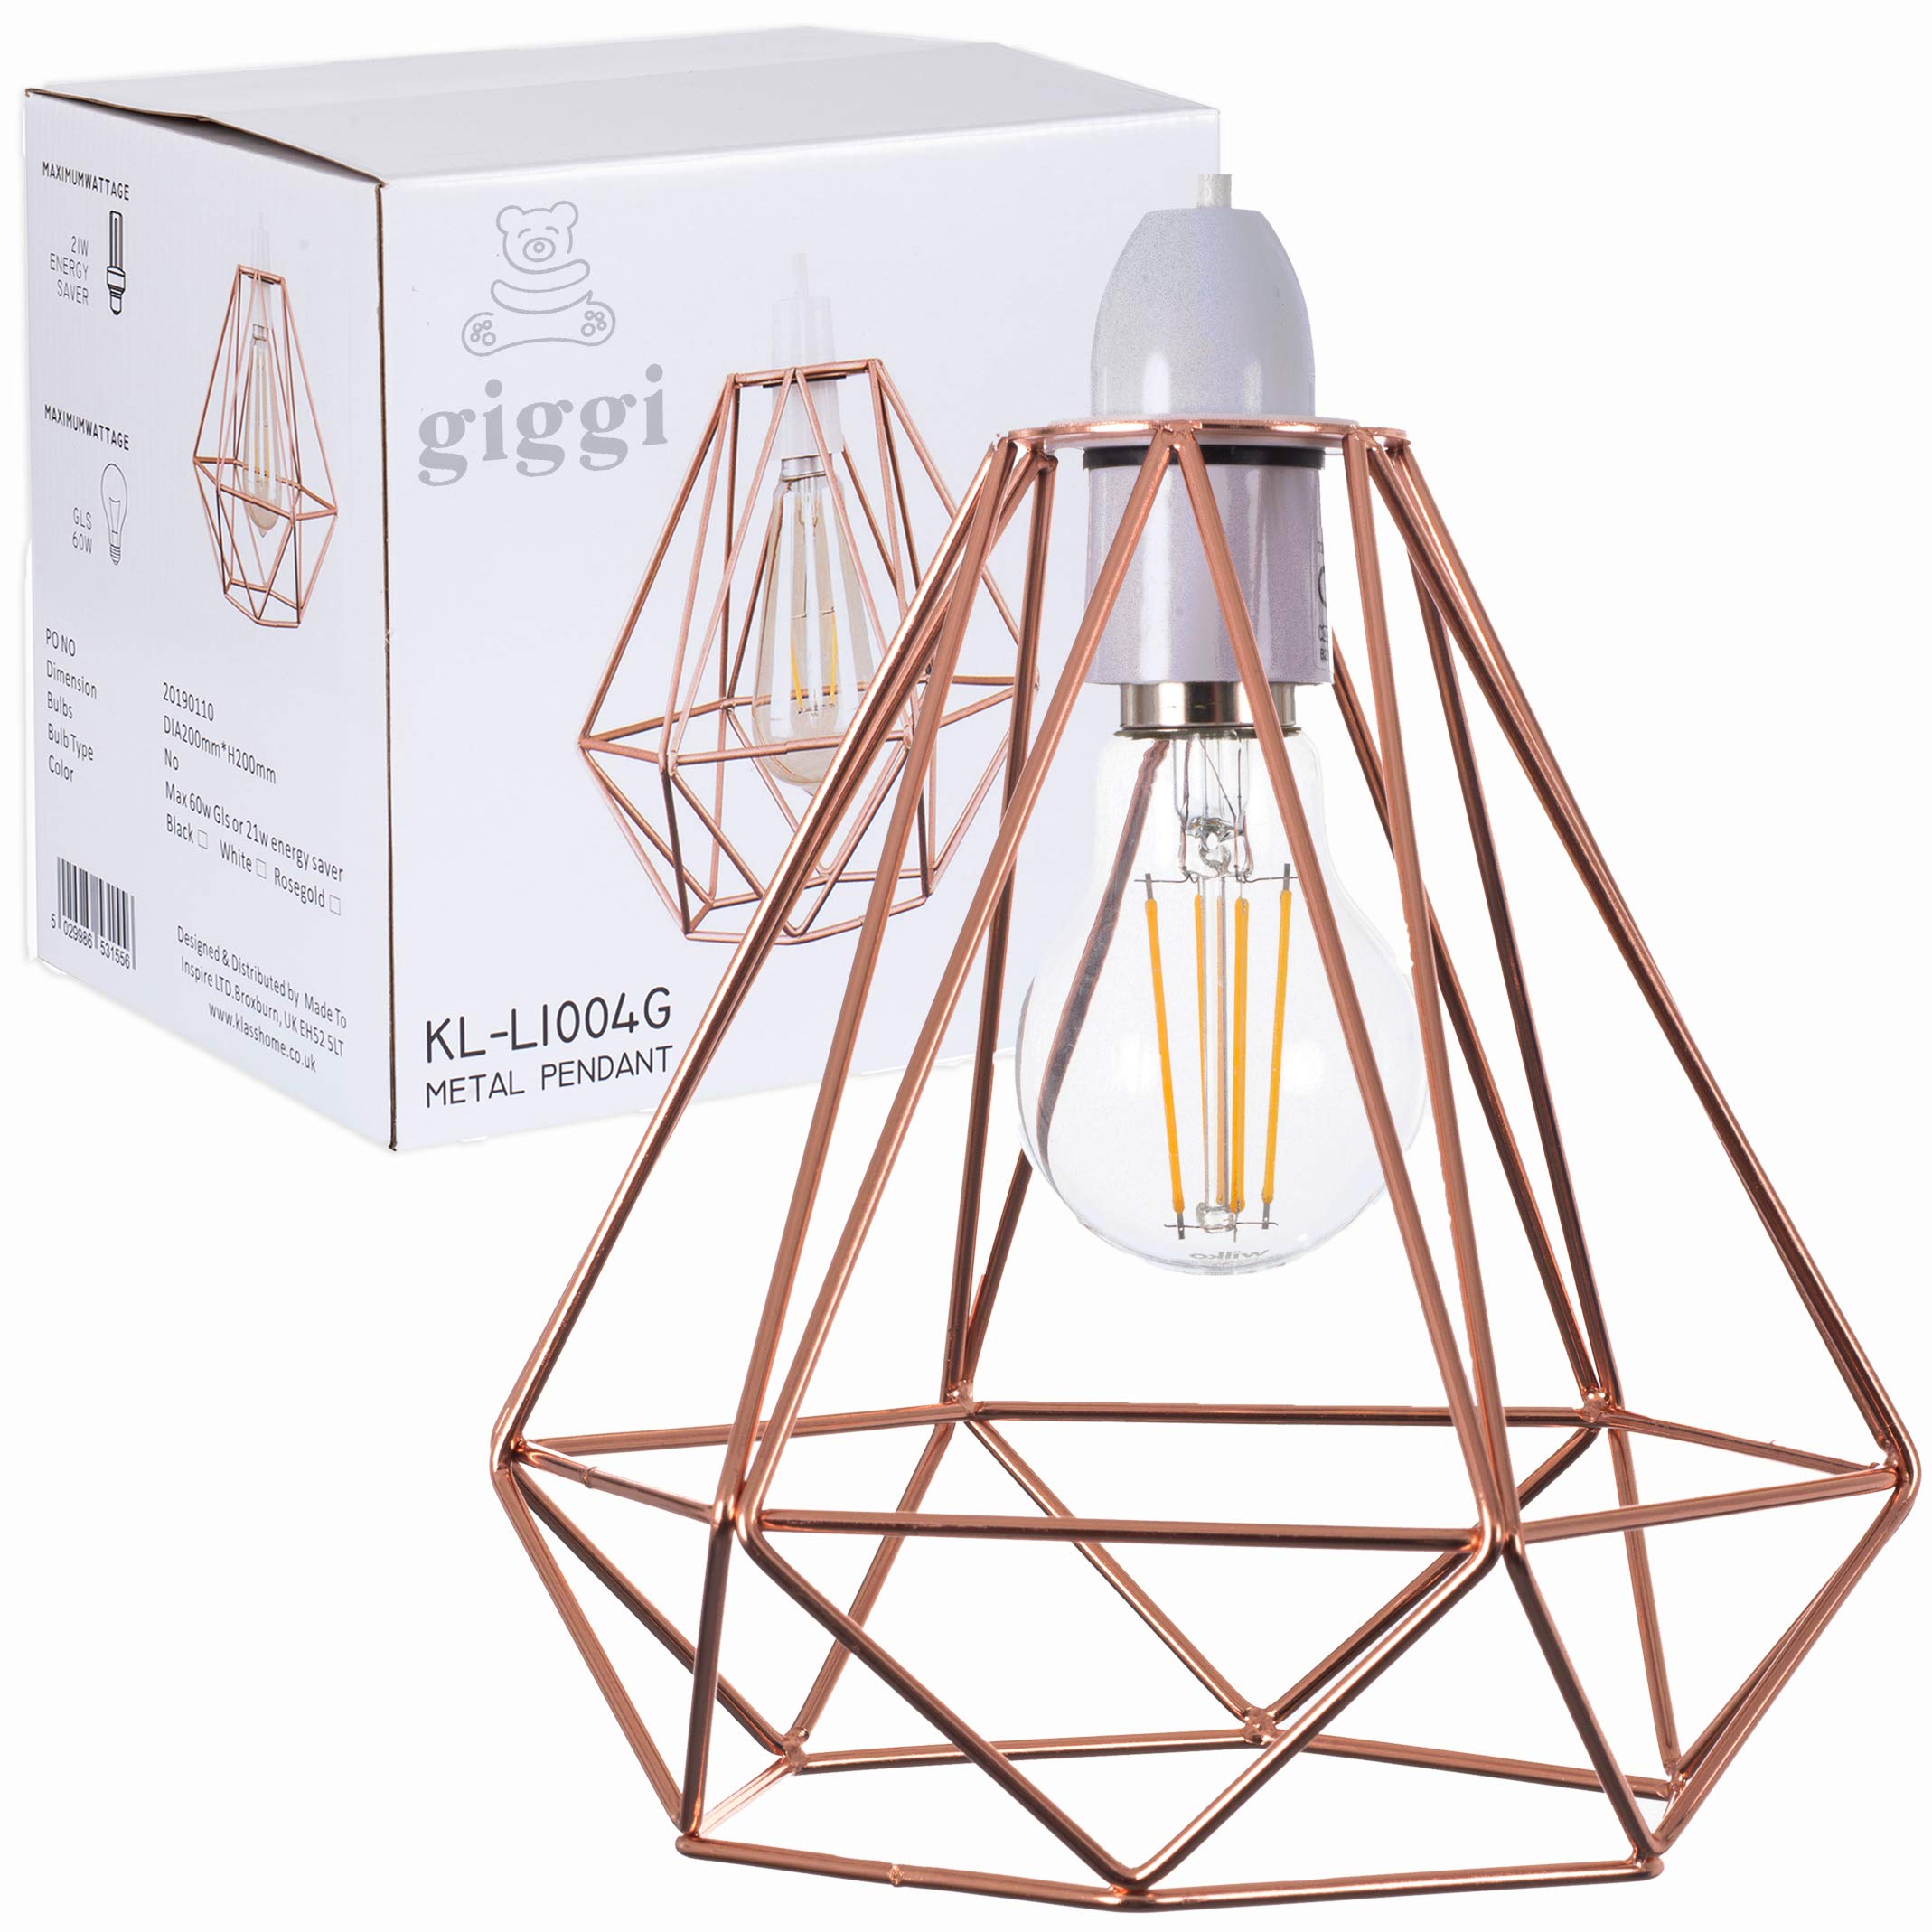 Giggi Rose Gold Lampshade Cage Metal Basket Ceiling Light Shade, Wrought Iron Ceiling Fitting Light & Industrial Style Ring Light Indoor, Metal Basket Pendant Light Shade with lamp Shade Reducer Ring